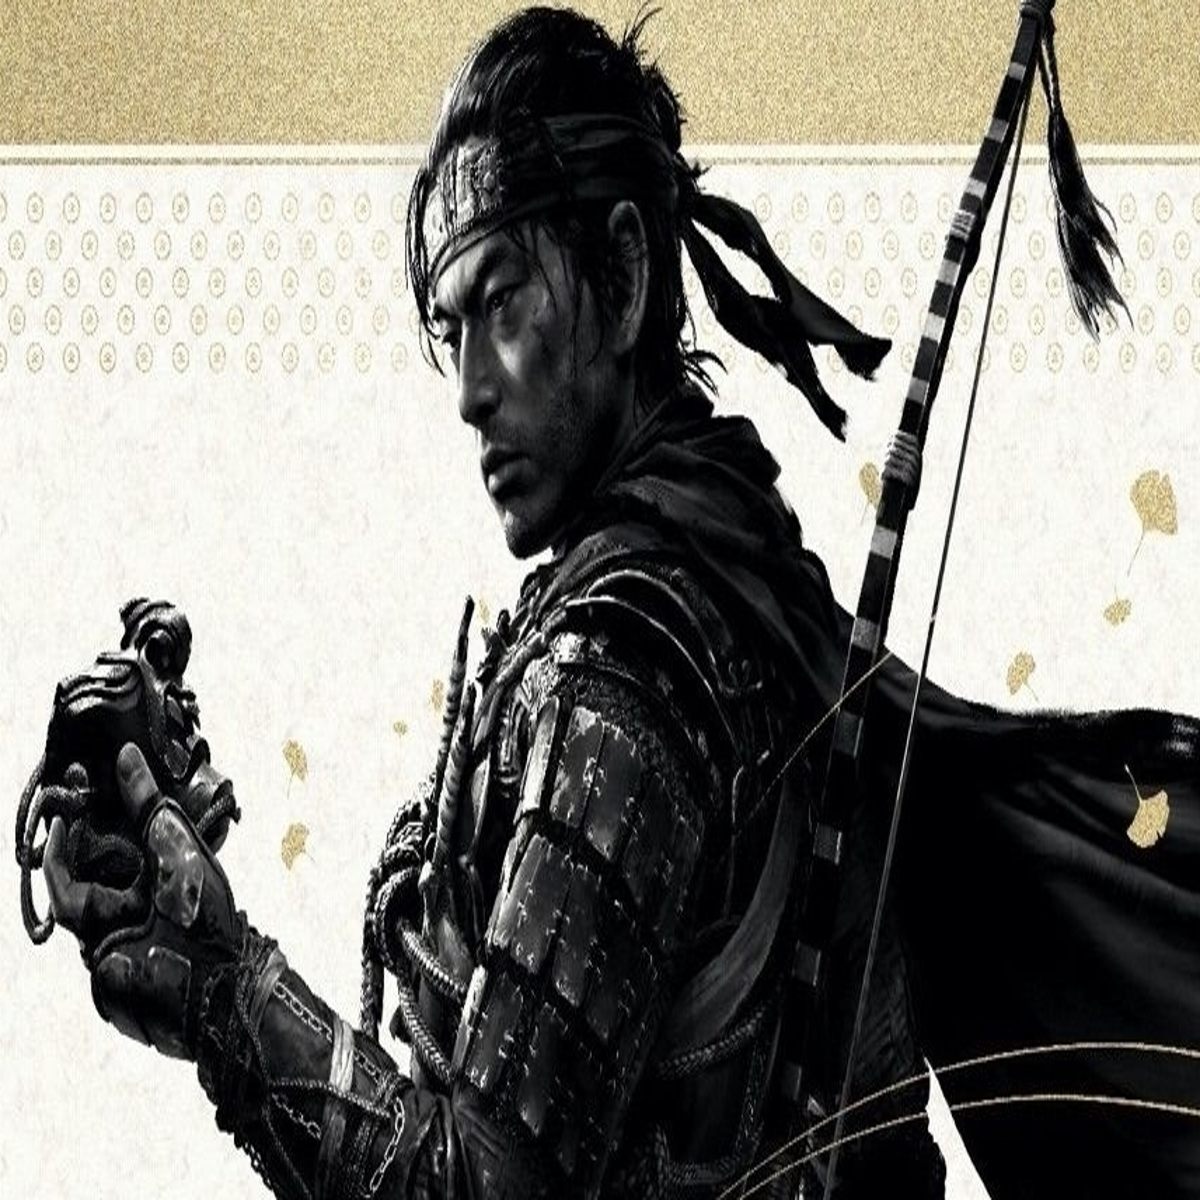 Ghost of Tsushima: Director's Cut has been rated for PS5 and PS4